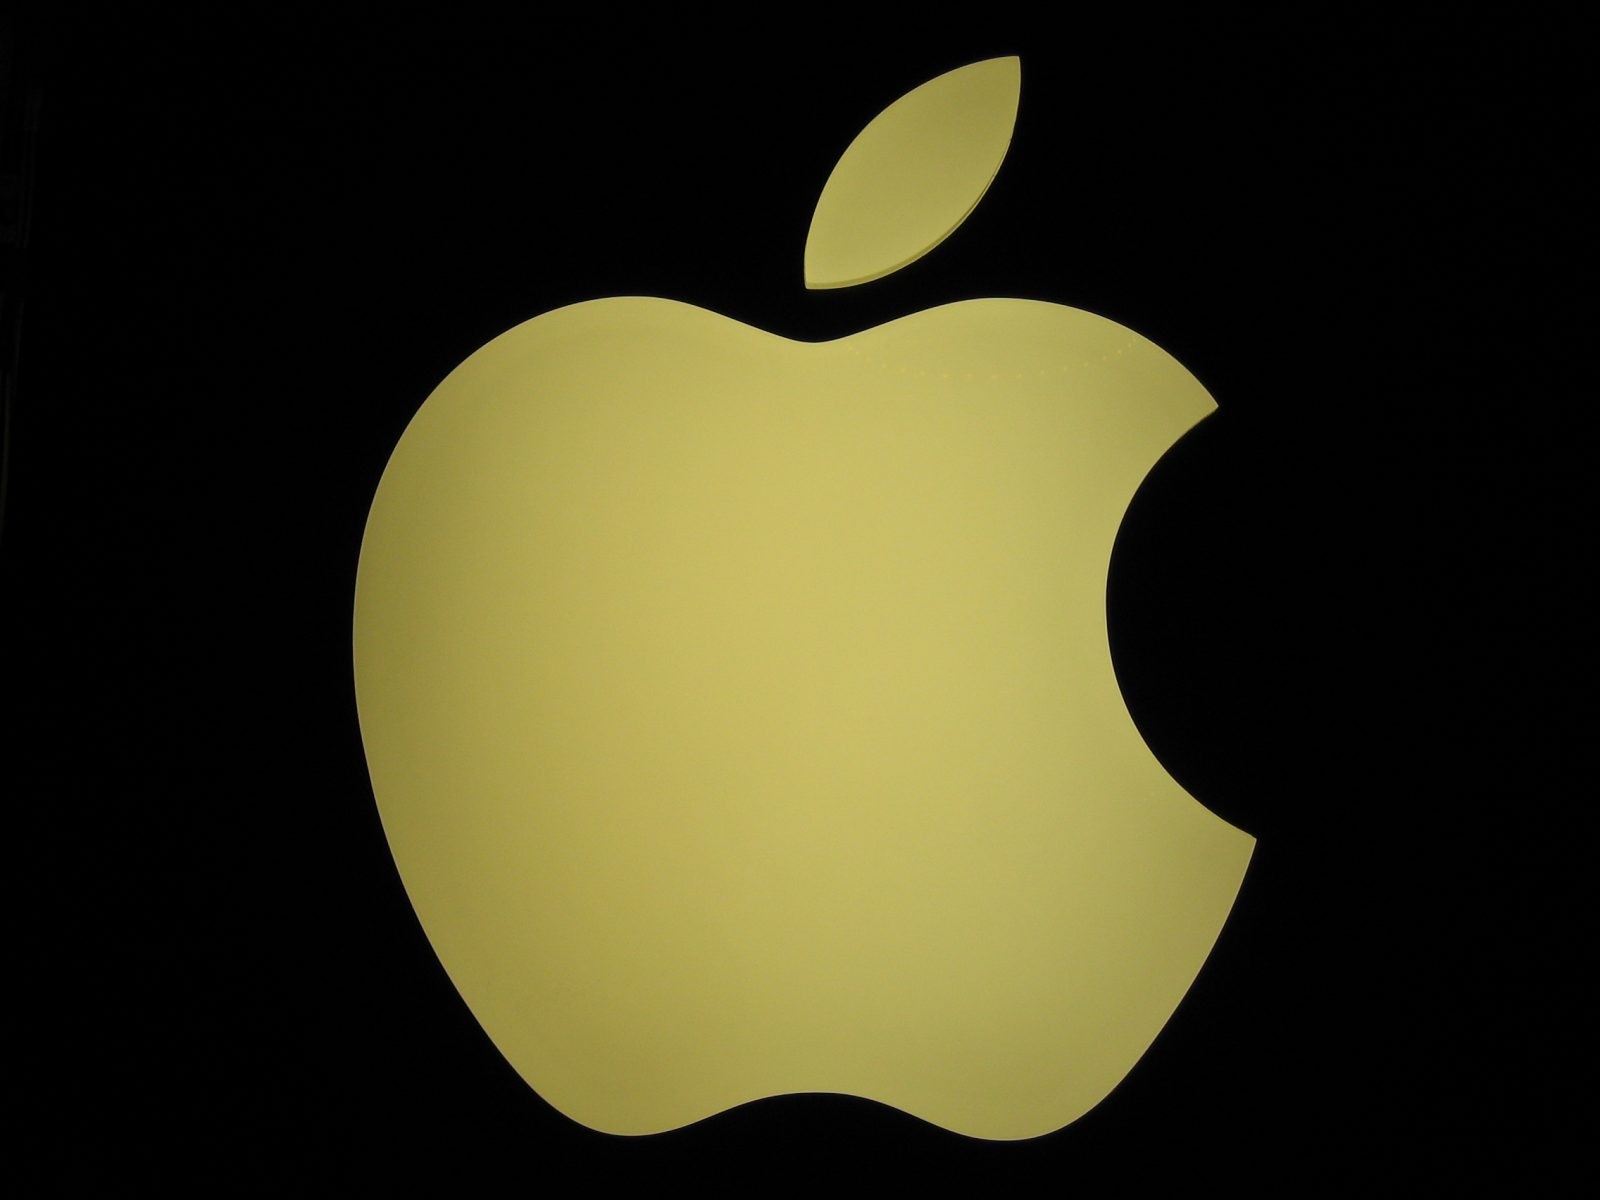 Is your legal nurse consulting brand as consistent as Apple’s? 